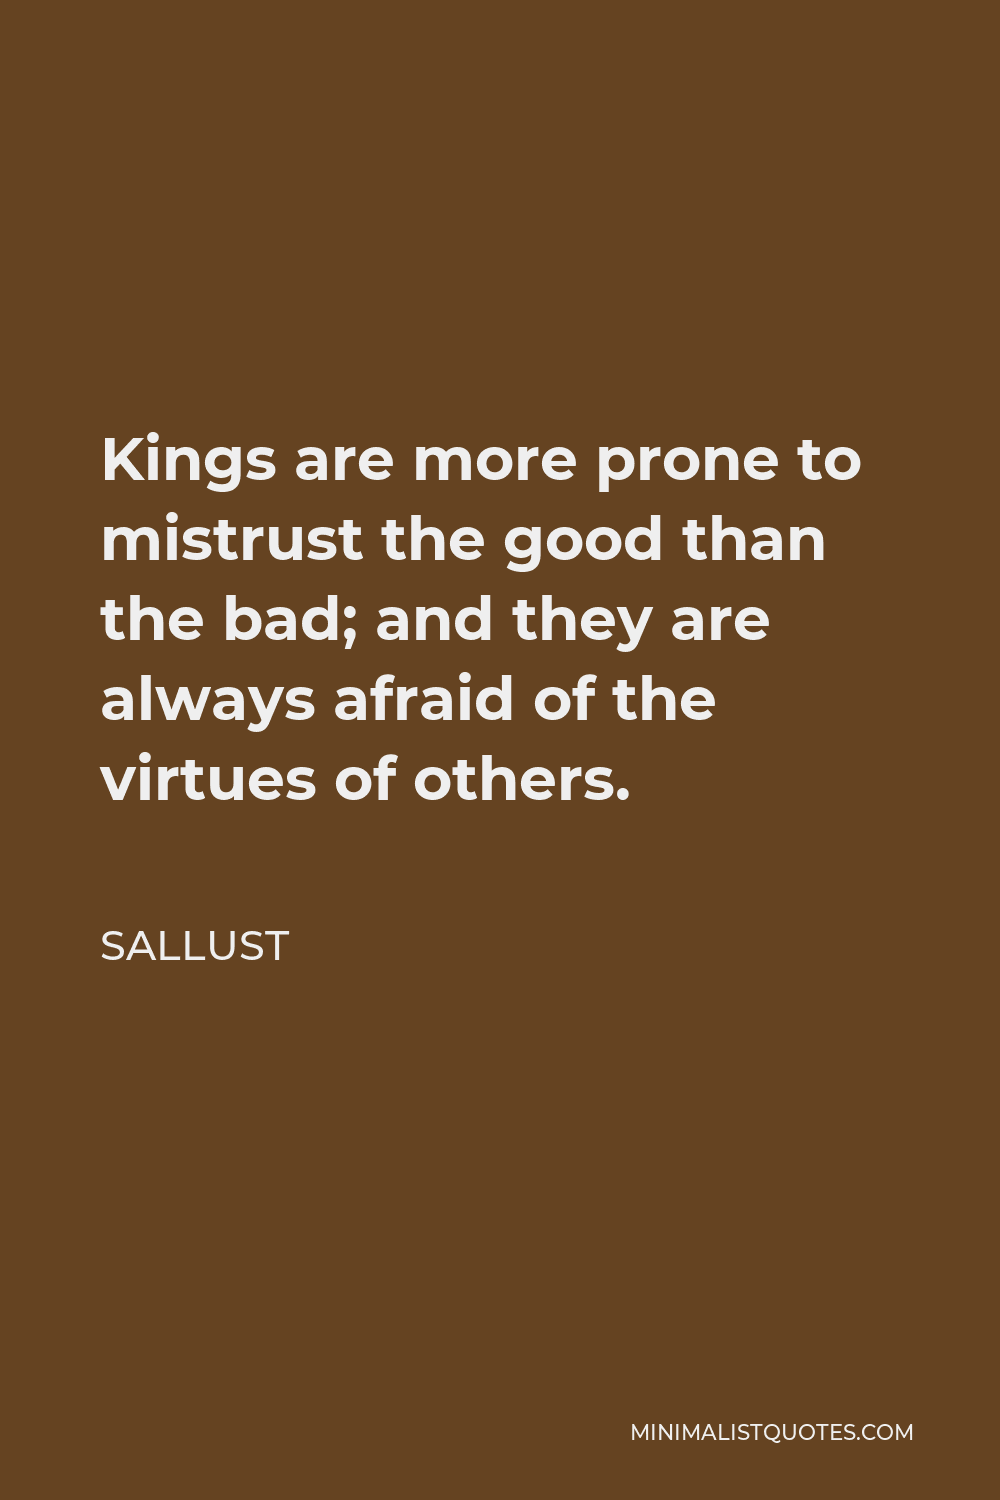 Sallust Quote - Kings are more prone to mistrust the good than the bad; and they are always afraid of the virtues of others.